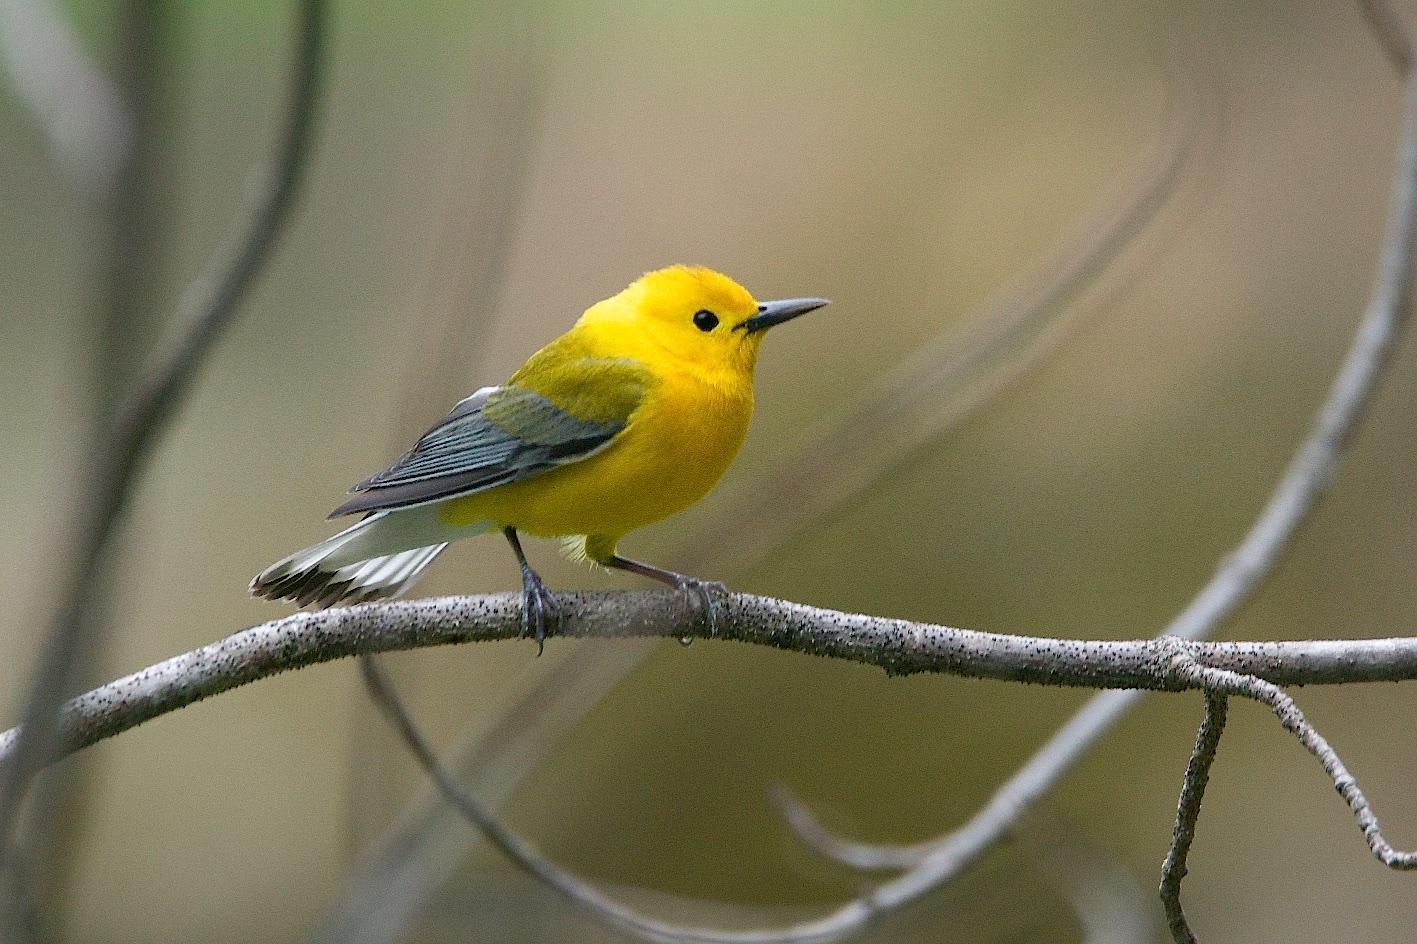 Prothonotary Warbler Photo by Gerald Hoekstra